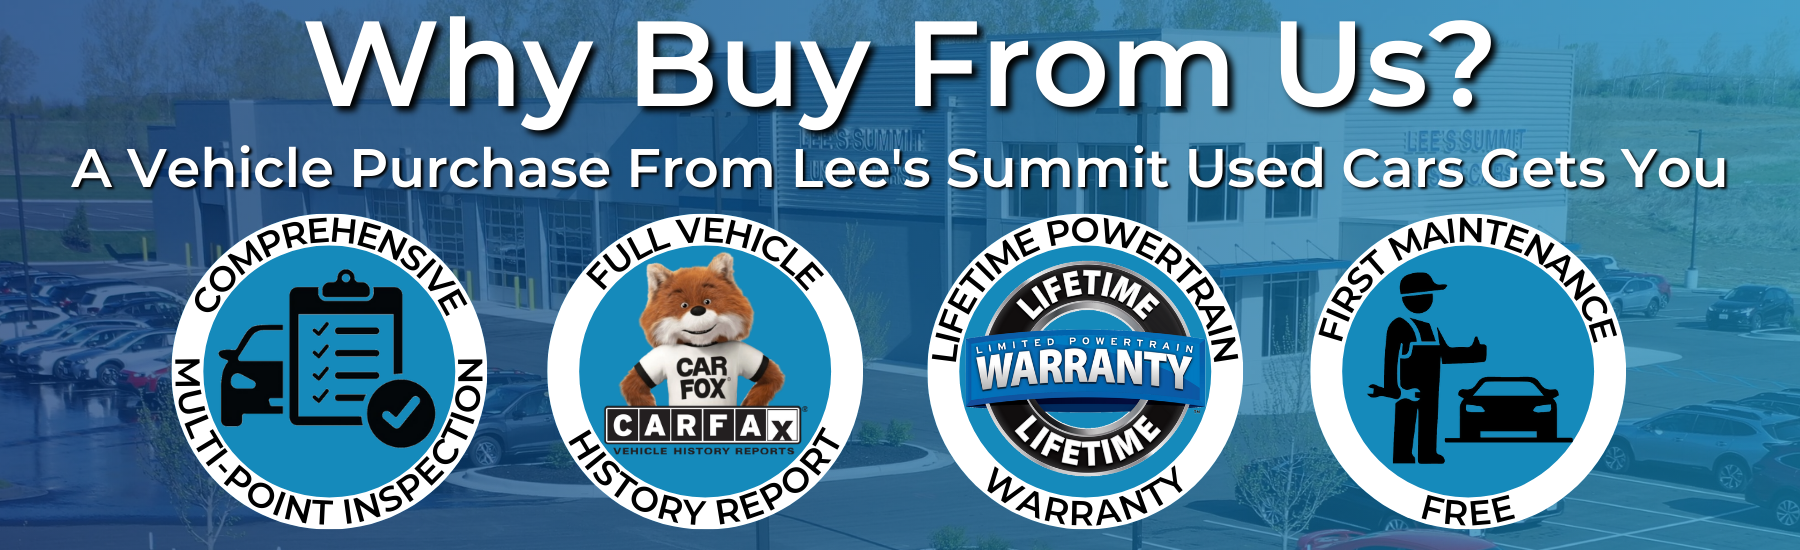 Why Buy From Lee's Summit Used Cars